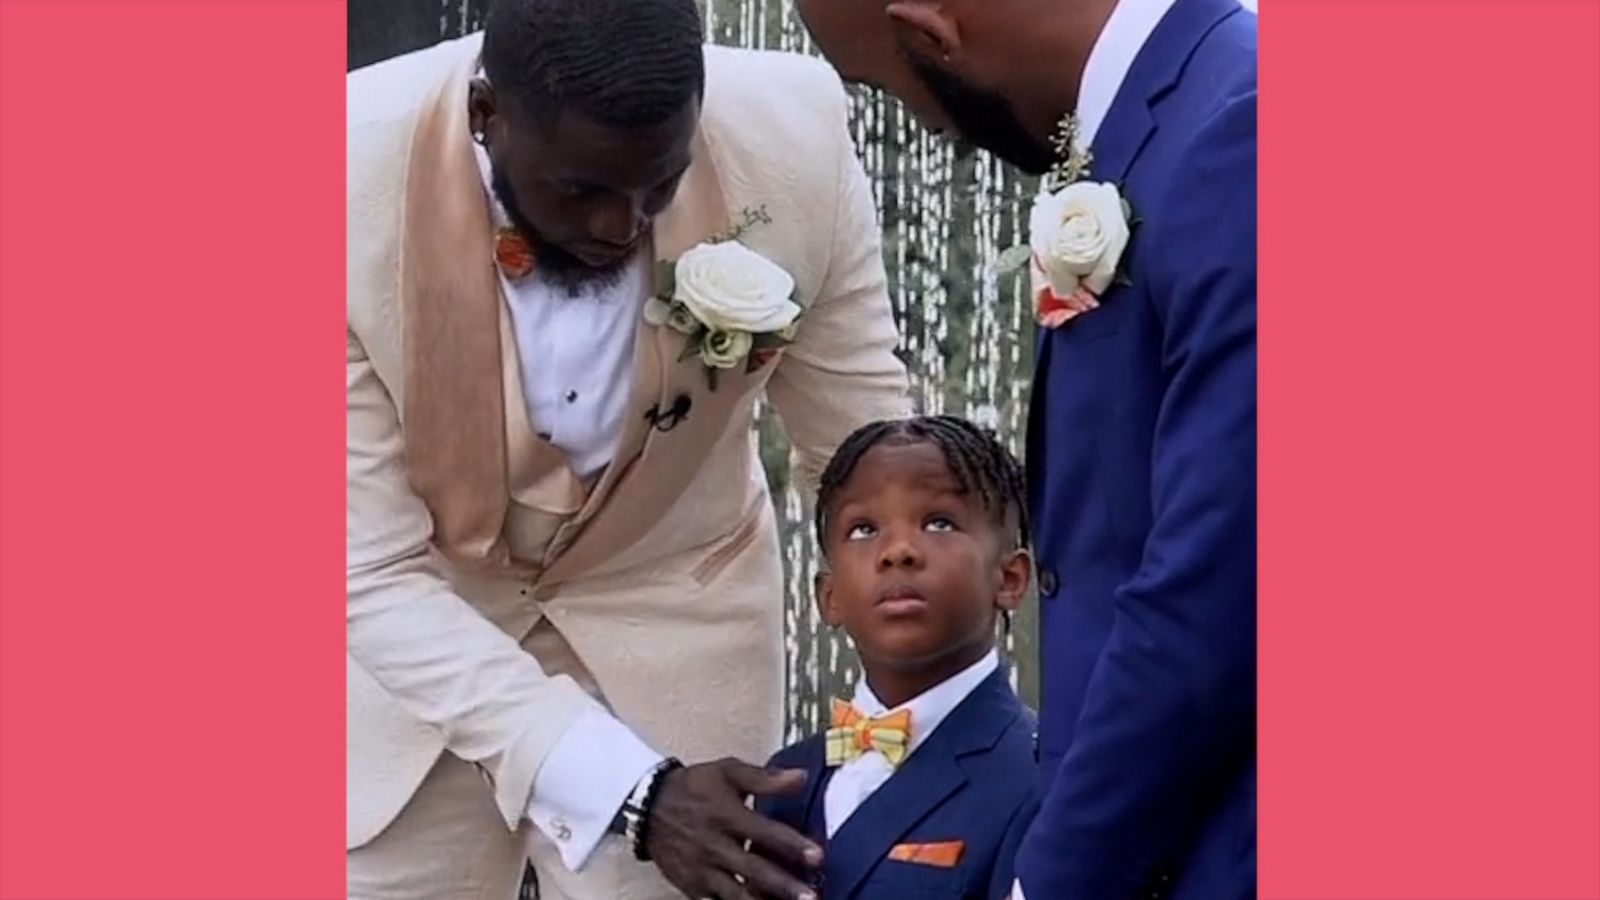 VIDEO: Adorable ring bearer doesn’t know what to do with ring at alter